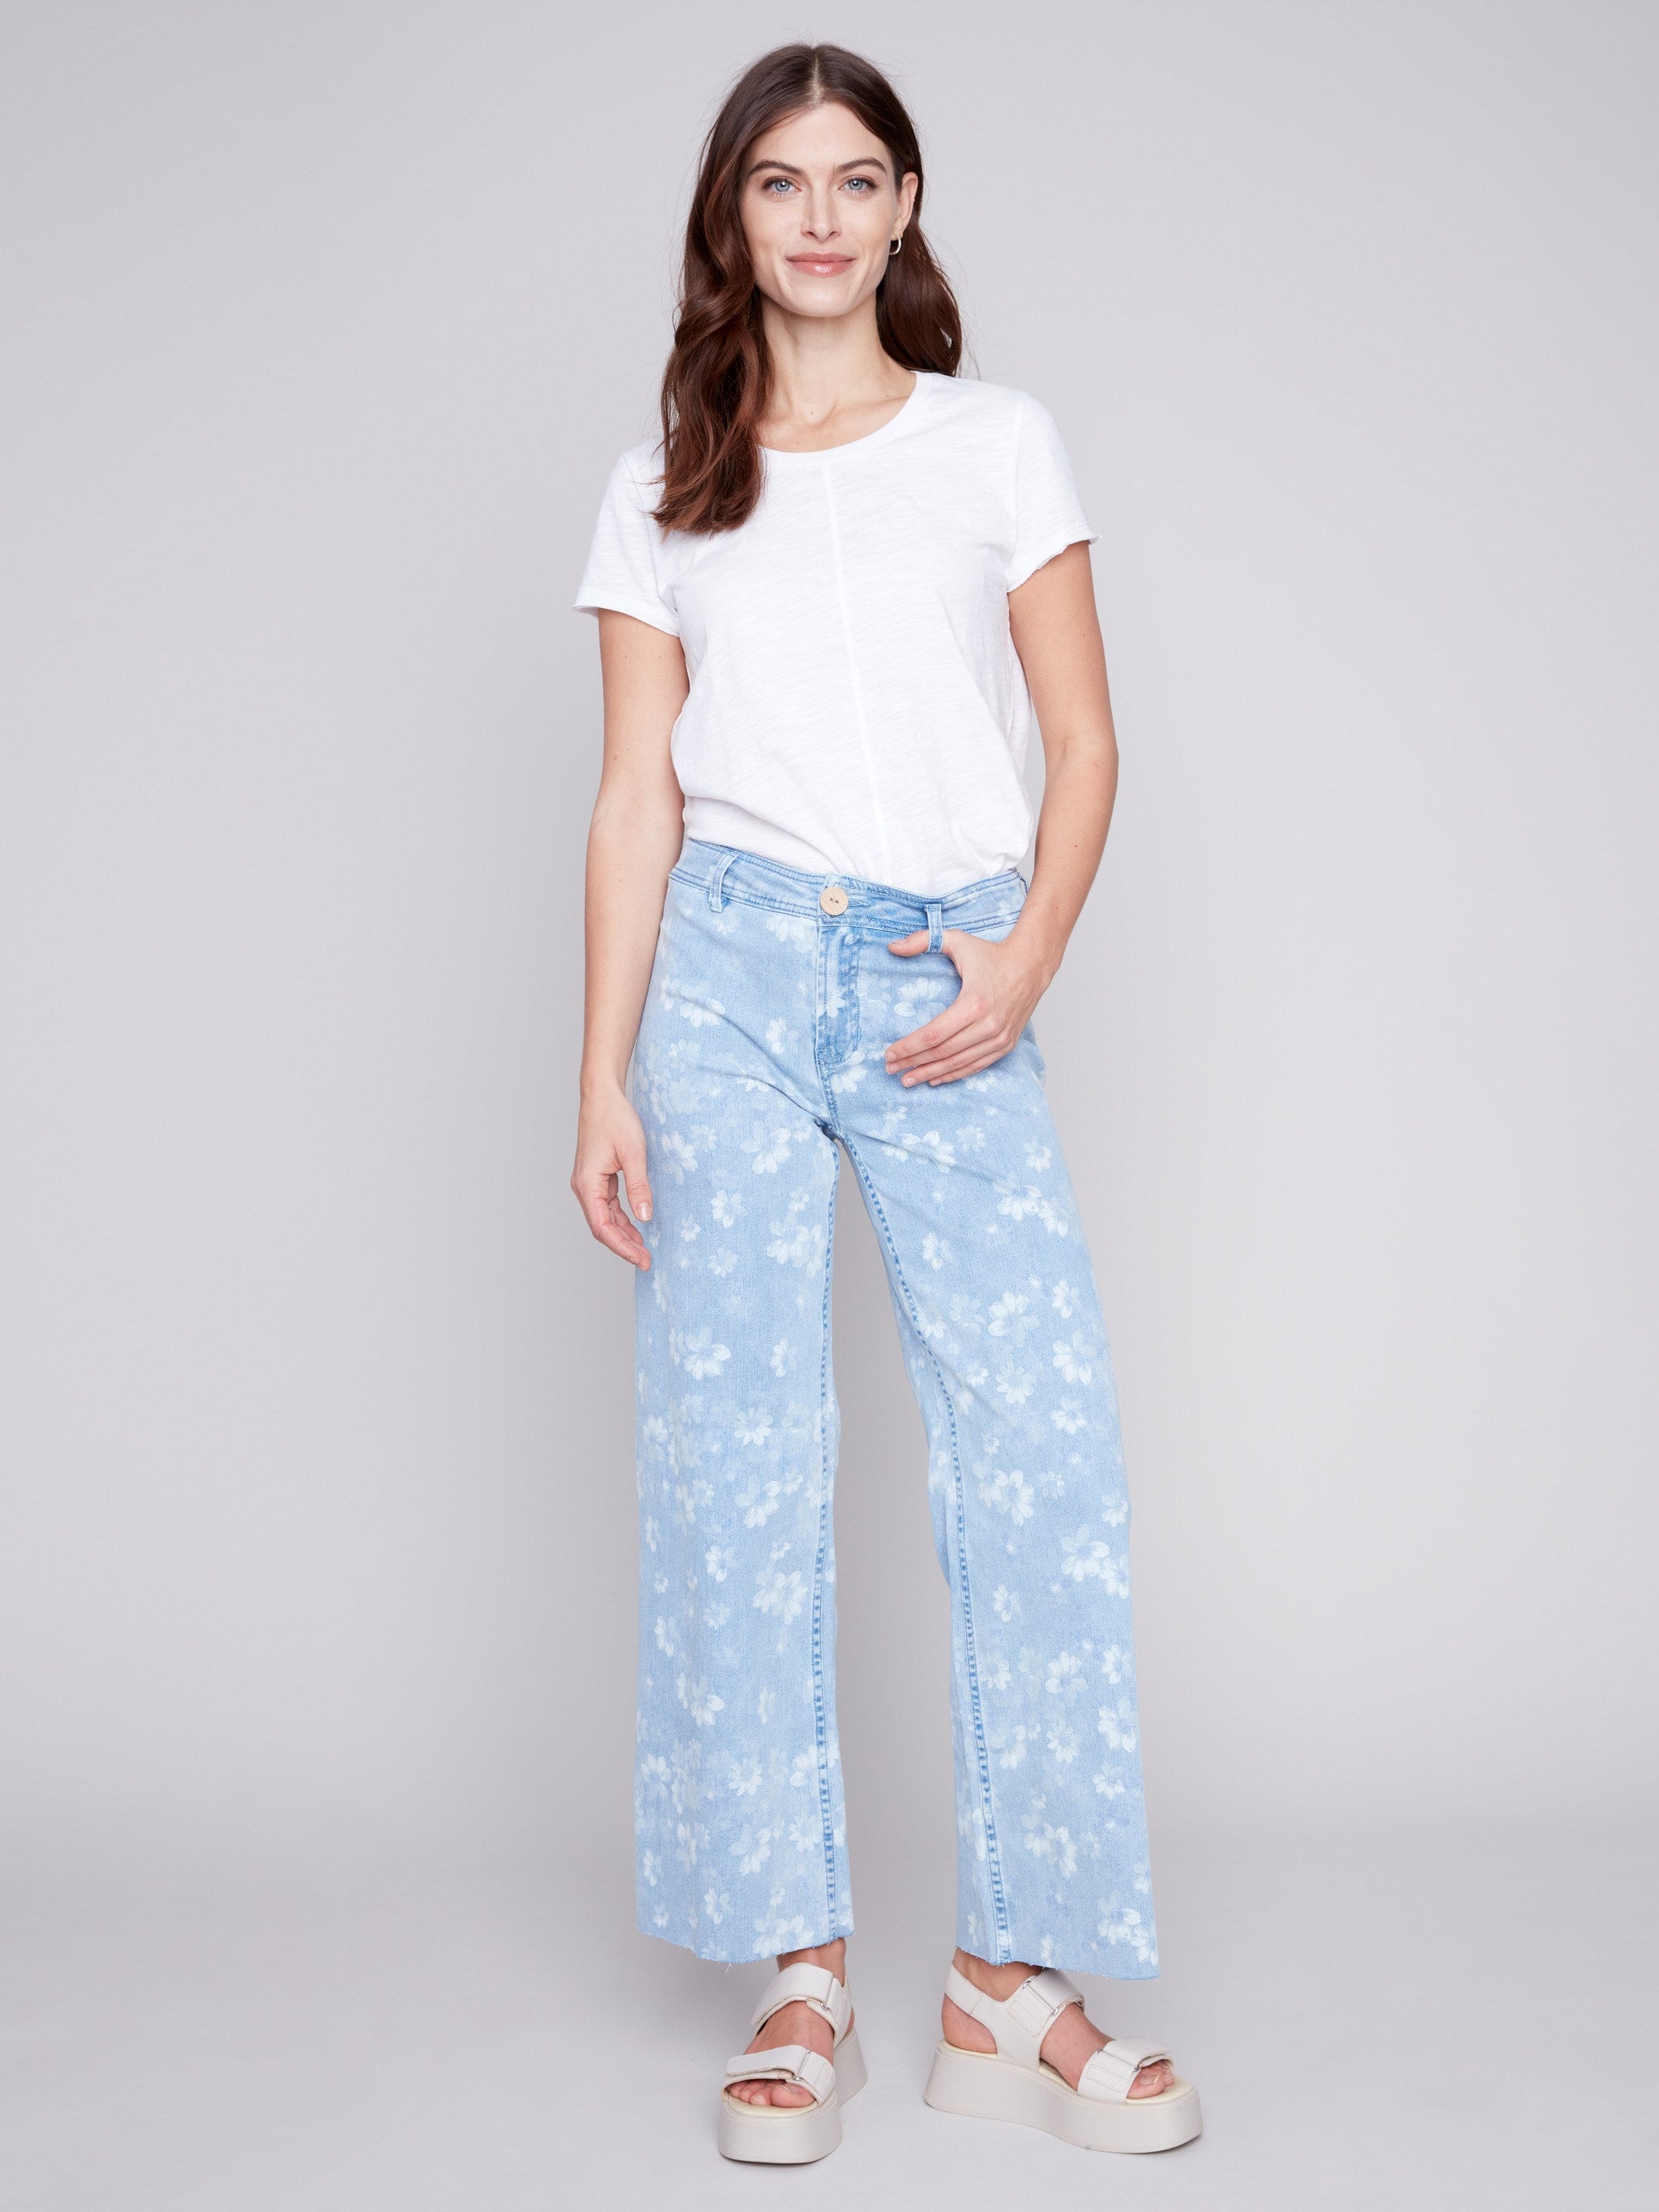 Printed Wide Leg Pants with Raw Hem - Daisy Blue - Charlie B Collection Canada - Image 1